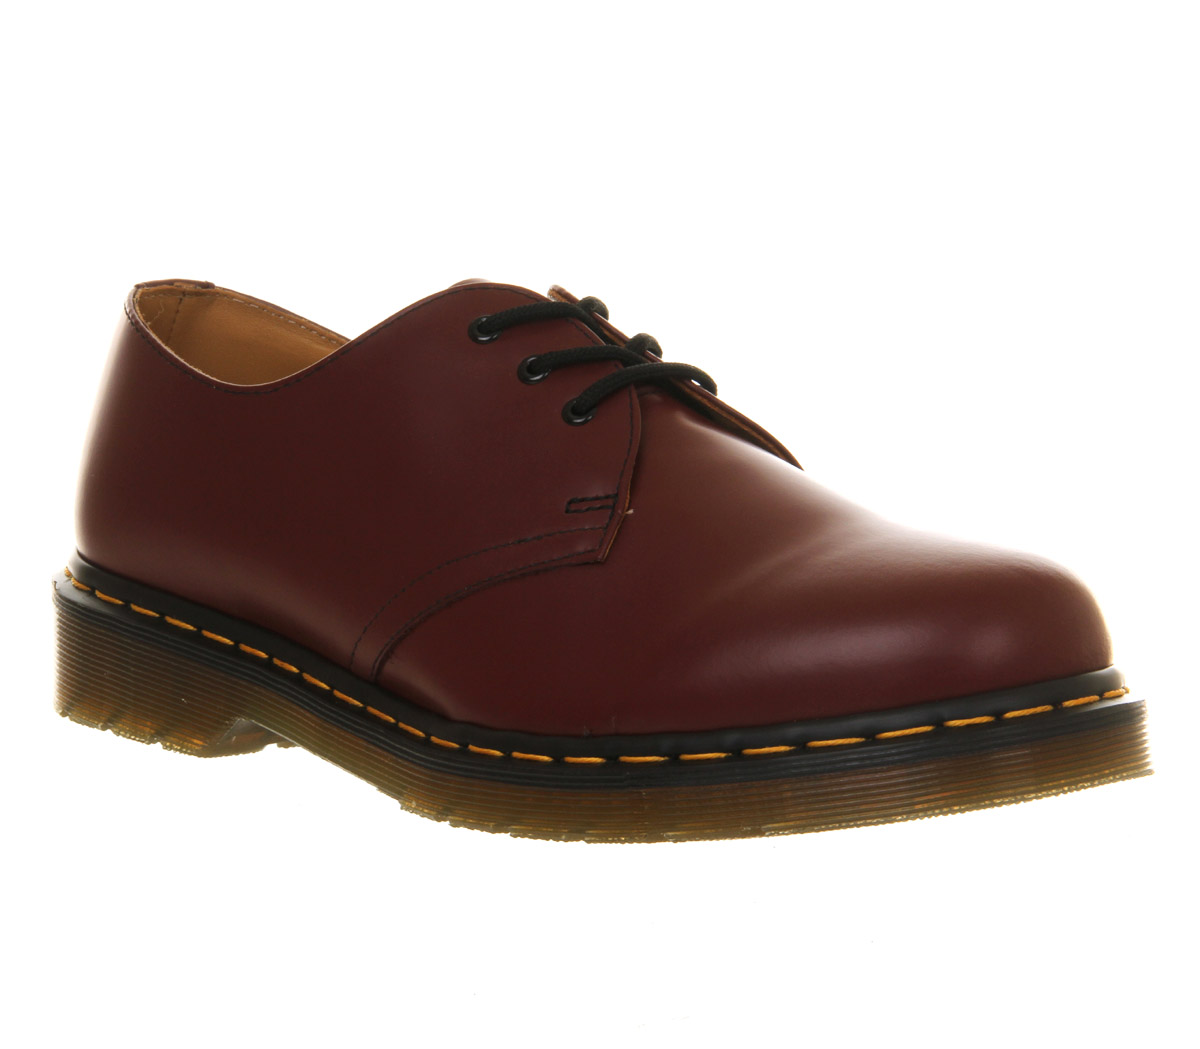 Dr. Martens3 Eye Lace ShoesCherry Leather